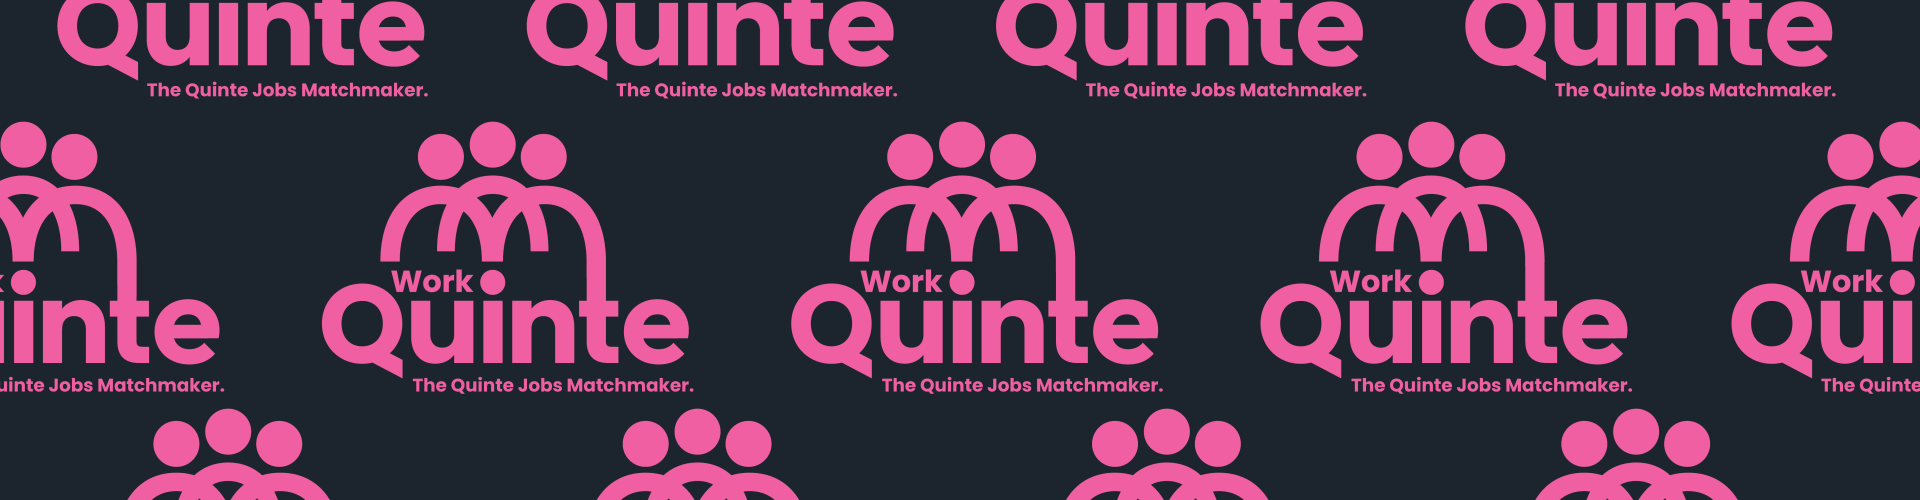 Black background with pink Work in Quinte logo and The Quinte Jobs Matchmaker tagline.